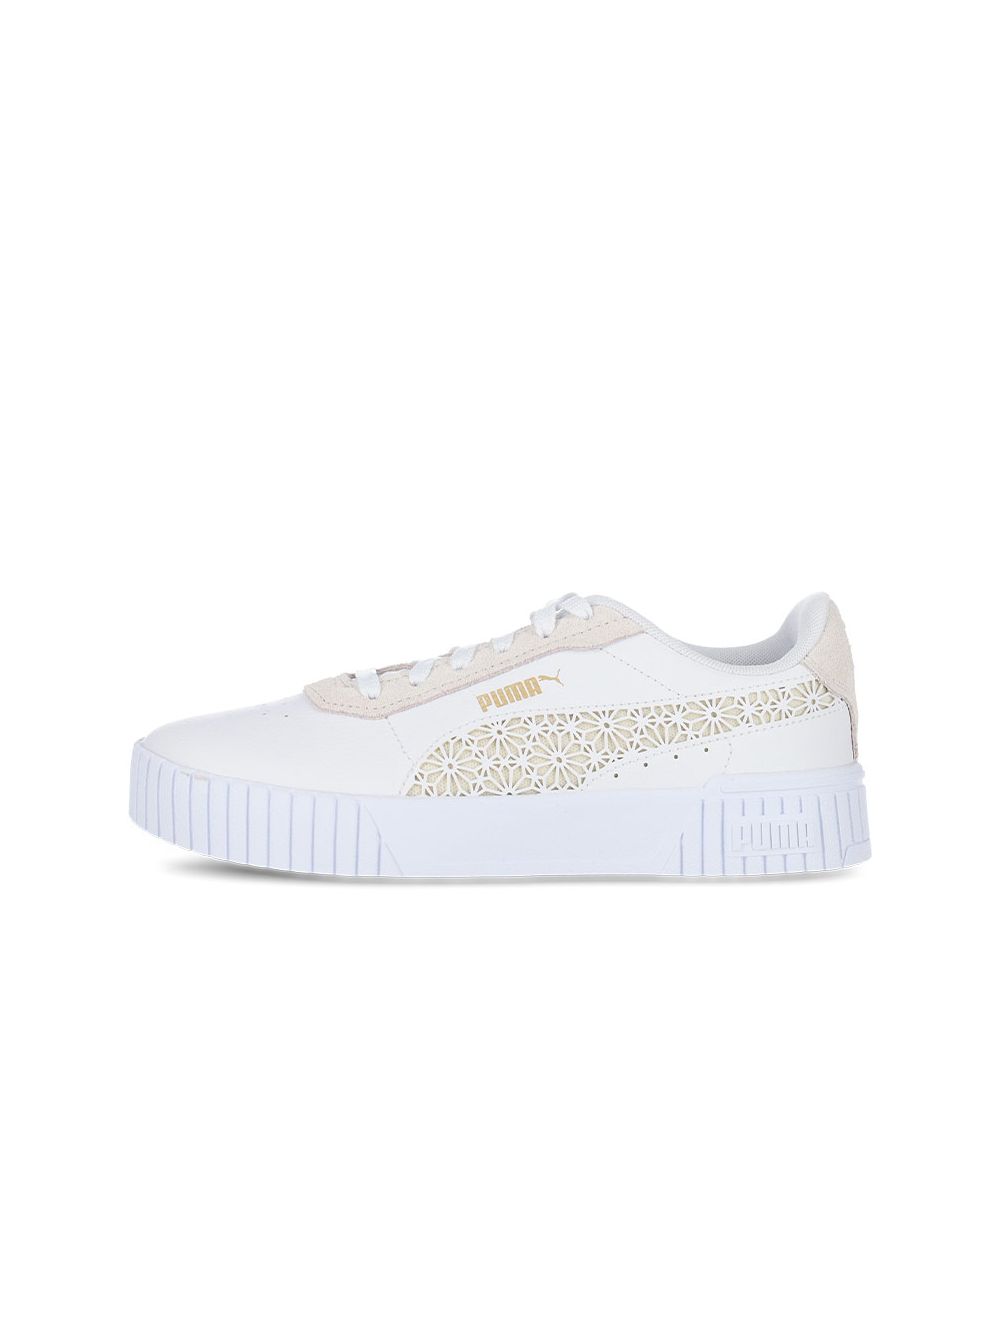 Shop PUMA Sneakers for Women Online in South Africa | SUPERBALIST-thephaco.com.vn